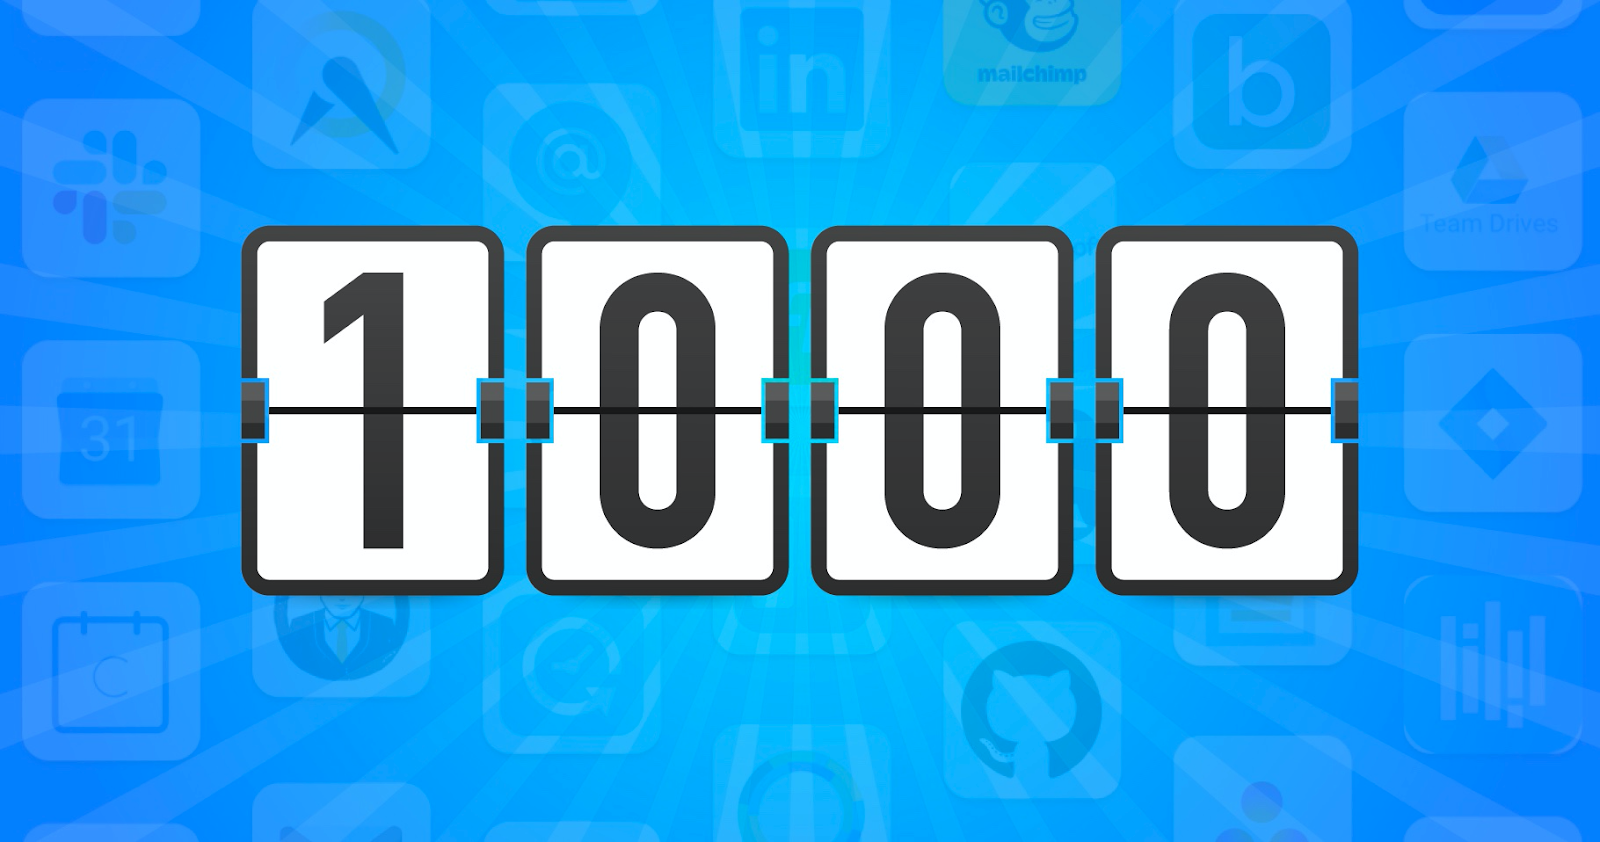 1000 Apps on the Marketplace